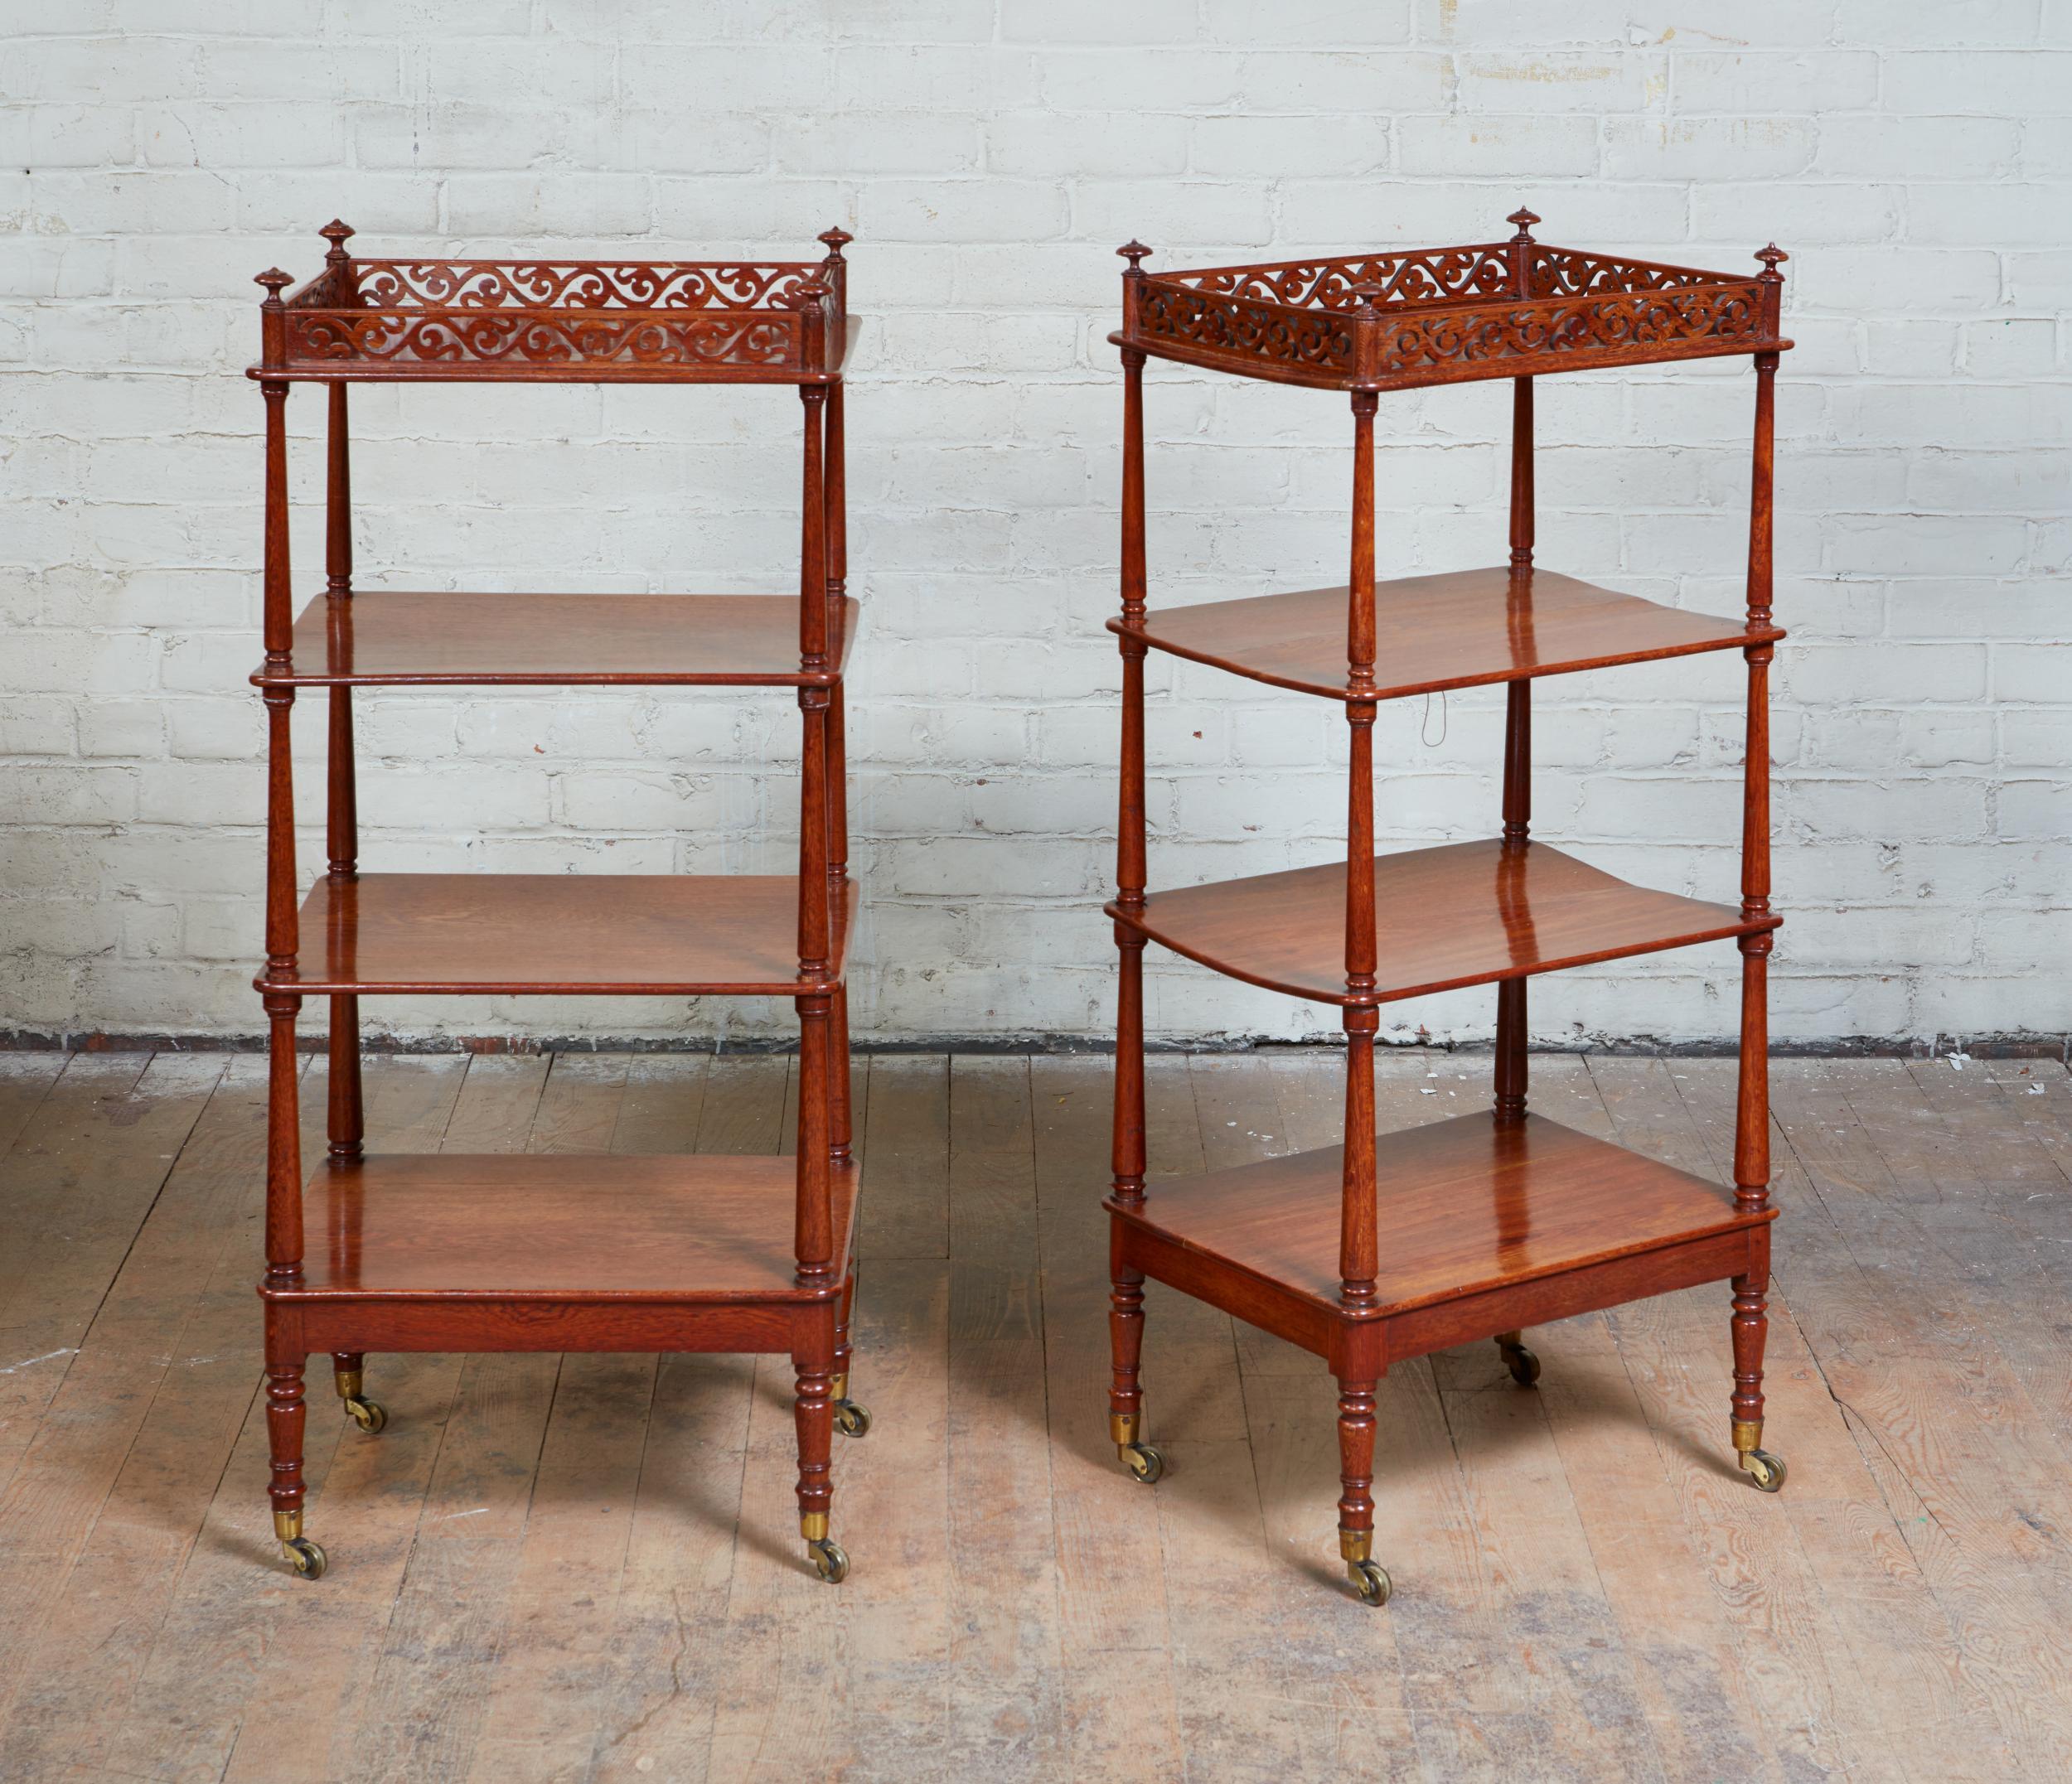 Fine and unusual pair of William IV period étagères having pierced galleries, four shelves and finely turned finials, uprights and legs, all made from an as yet unidentified exotic hardwood, possessing a good mellow surface and retaining original